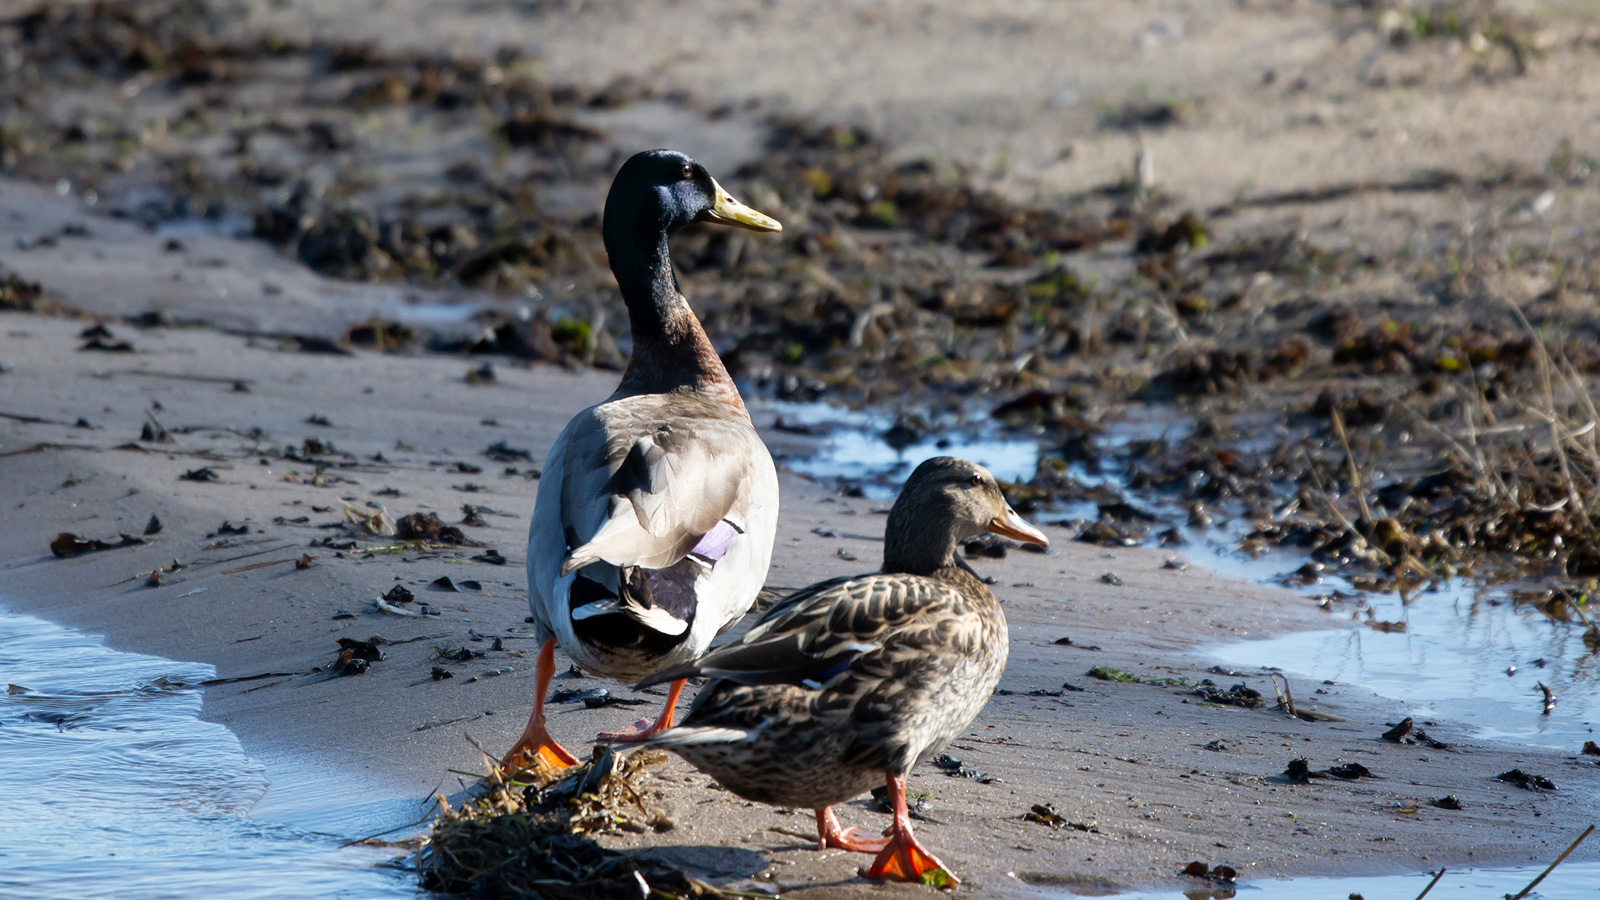 Two mallards, a male and a female, walking on a sandy beach